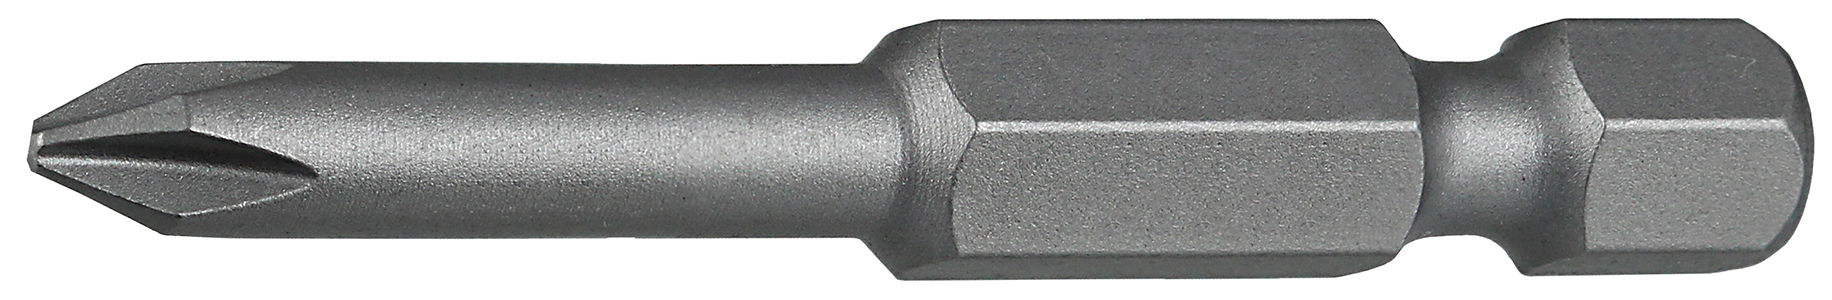 Power Bit, #2 tip size, Phillips tip type, 3 in. overall length, Hex shank shape, #8-10 screw size